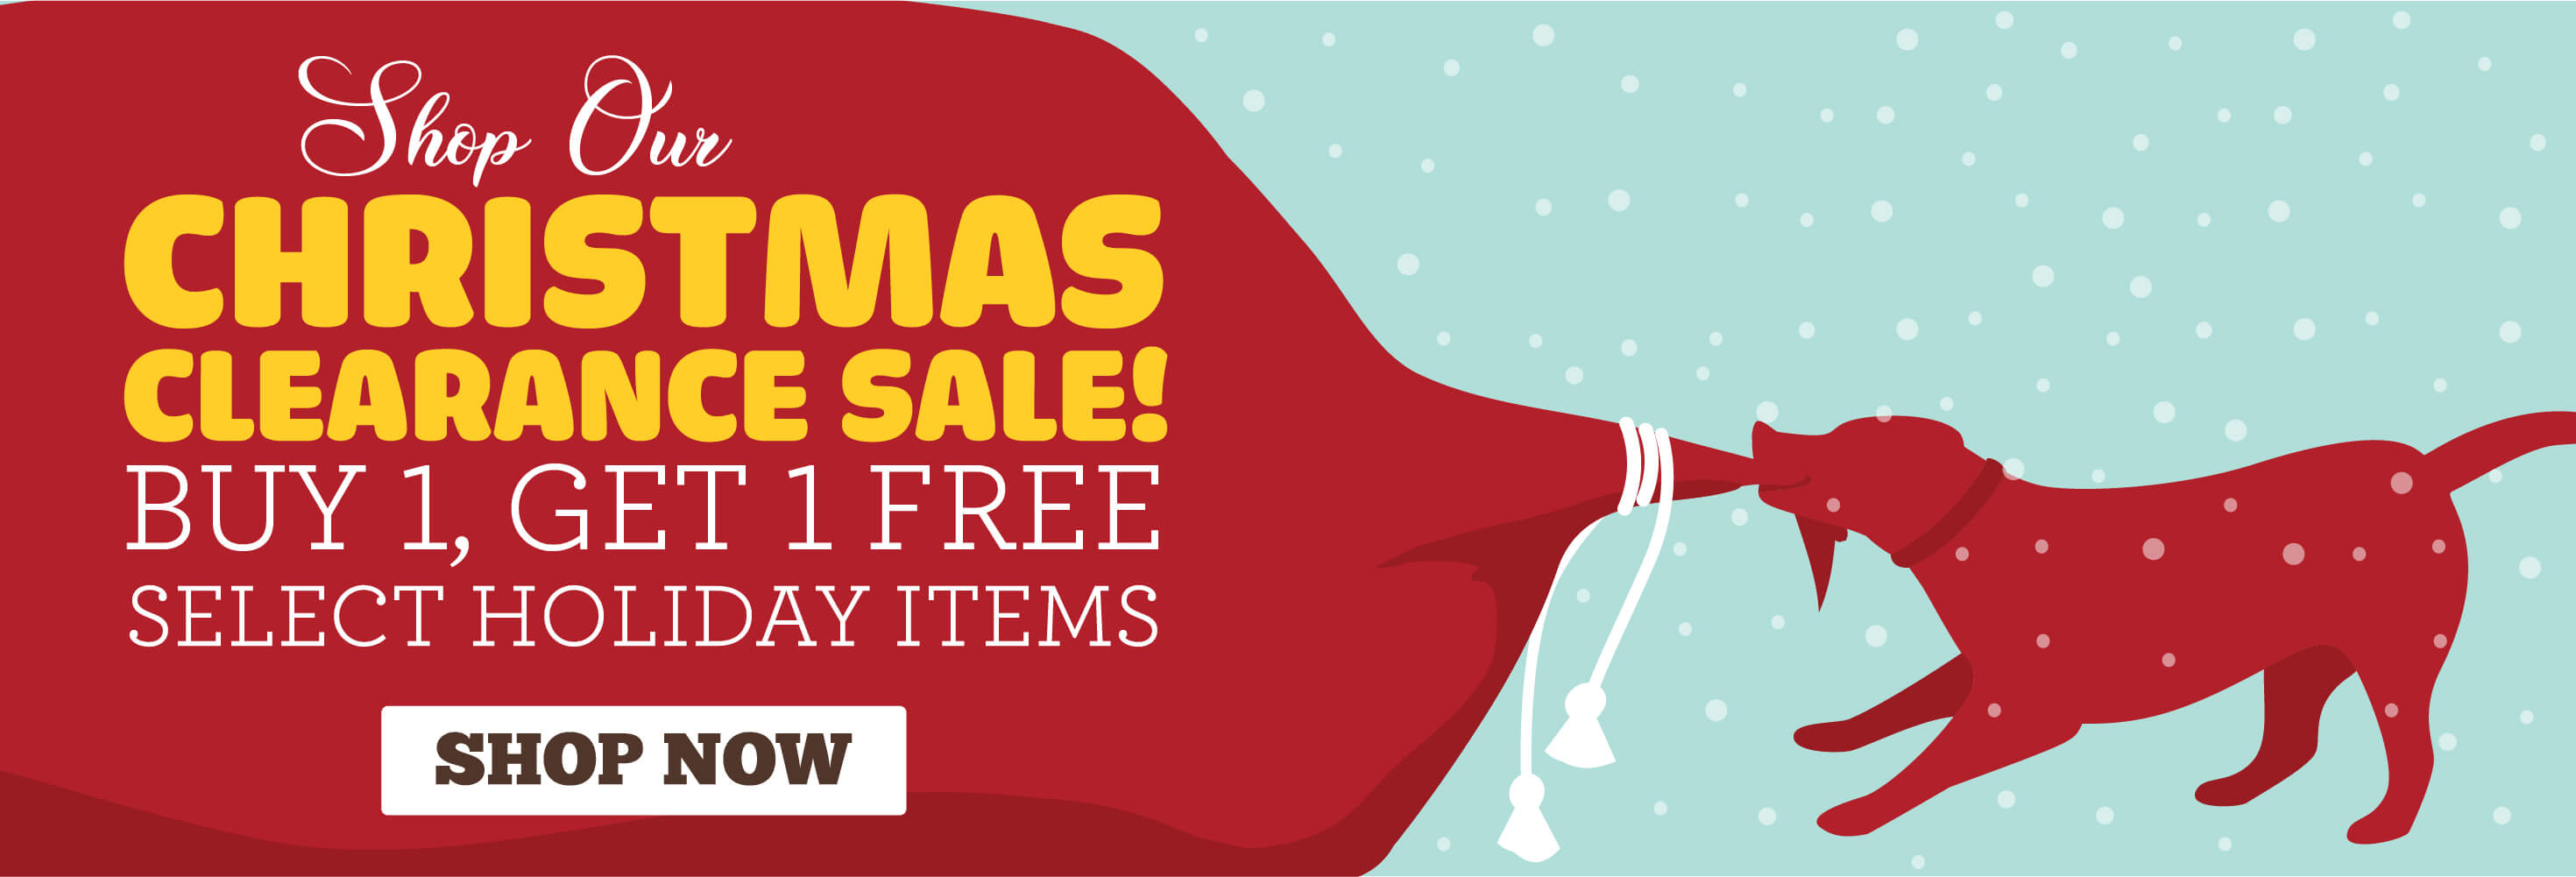 Shop Our Christmas Clearance Sale. Buy 1, Get 1 Free Select Holiday Items